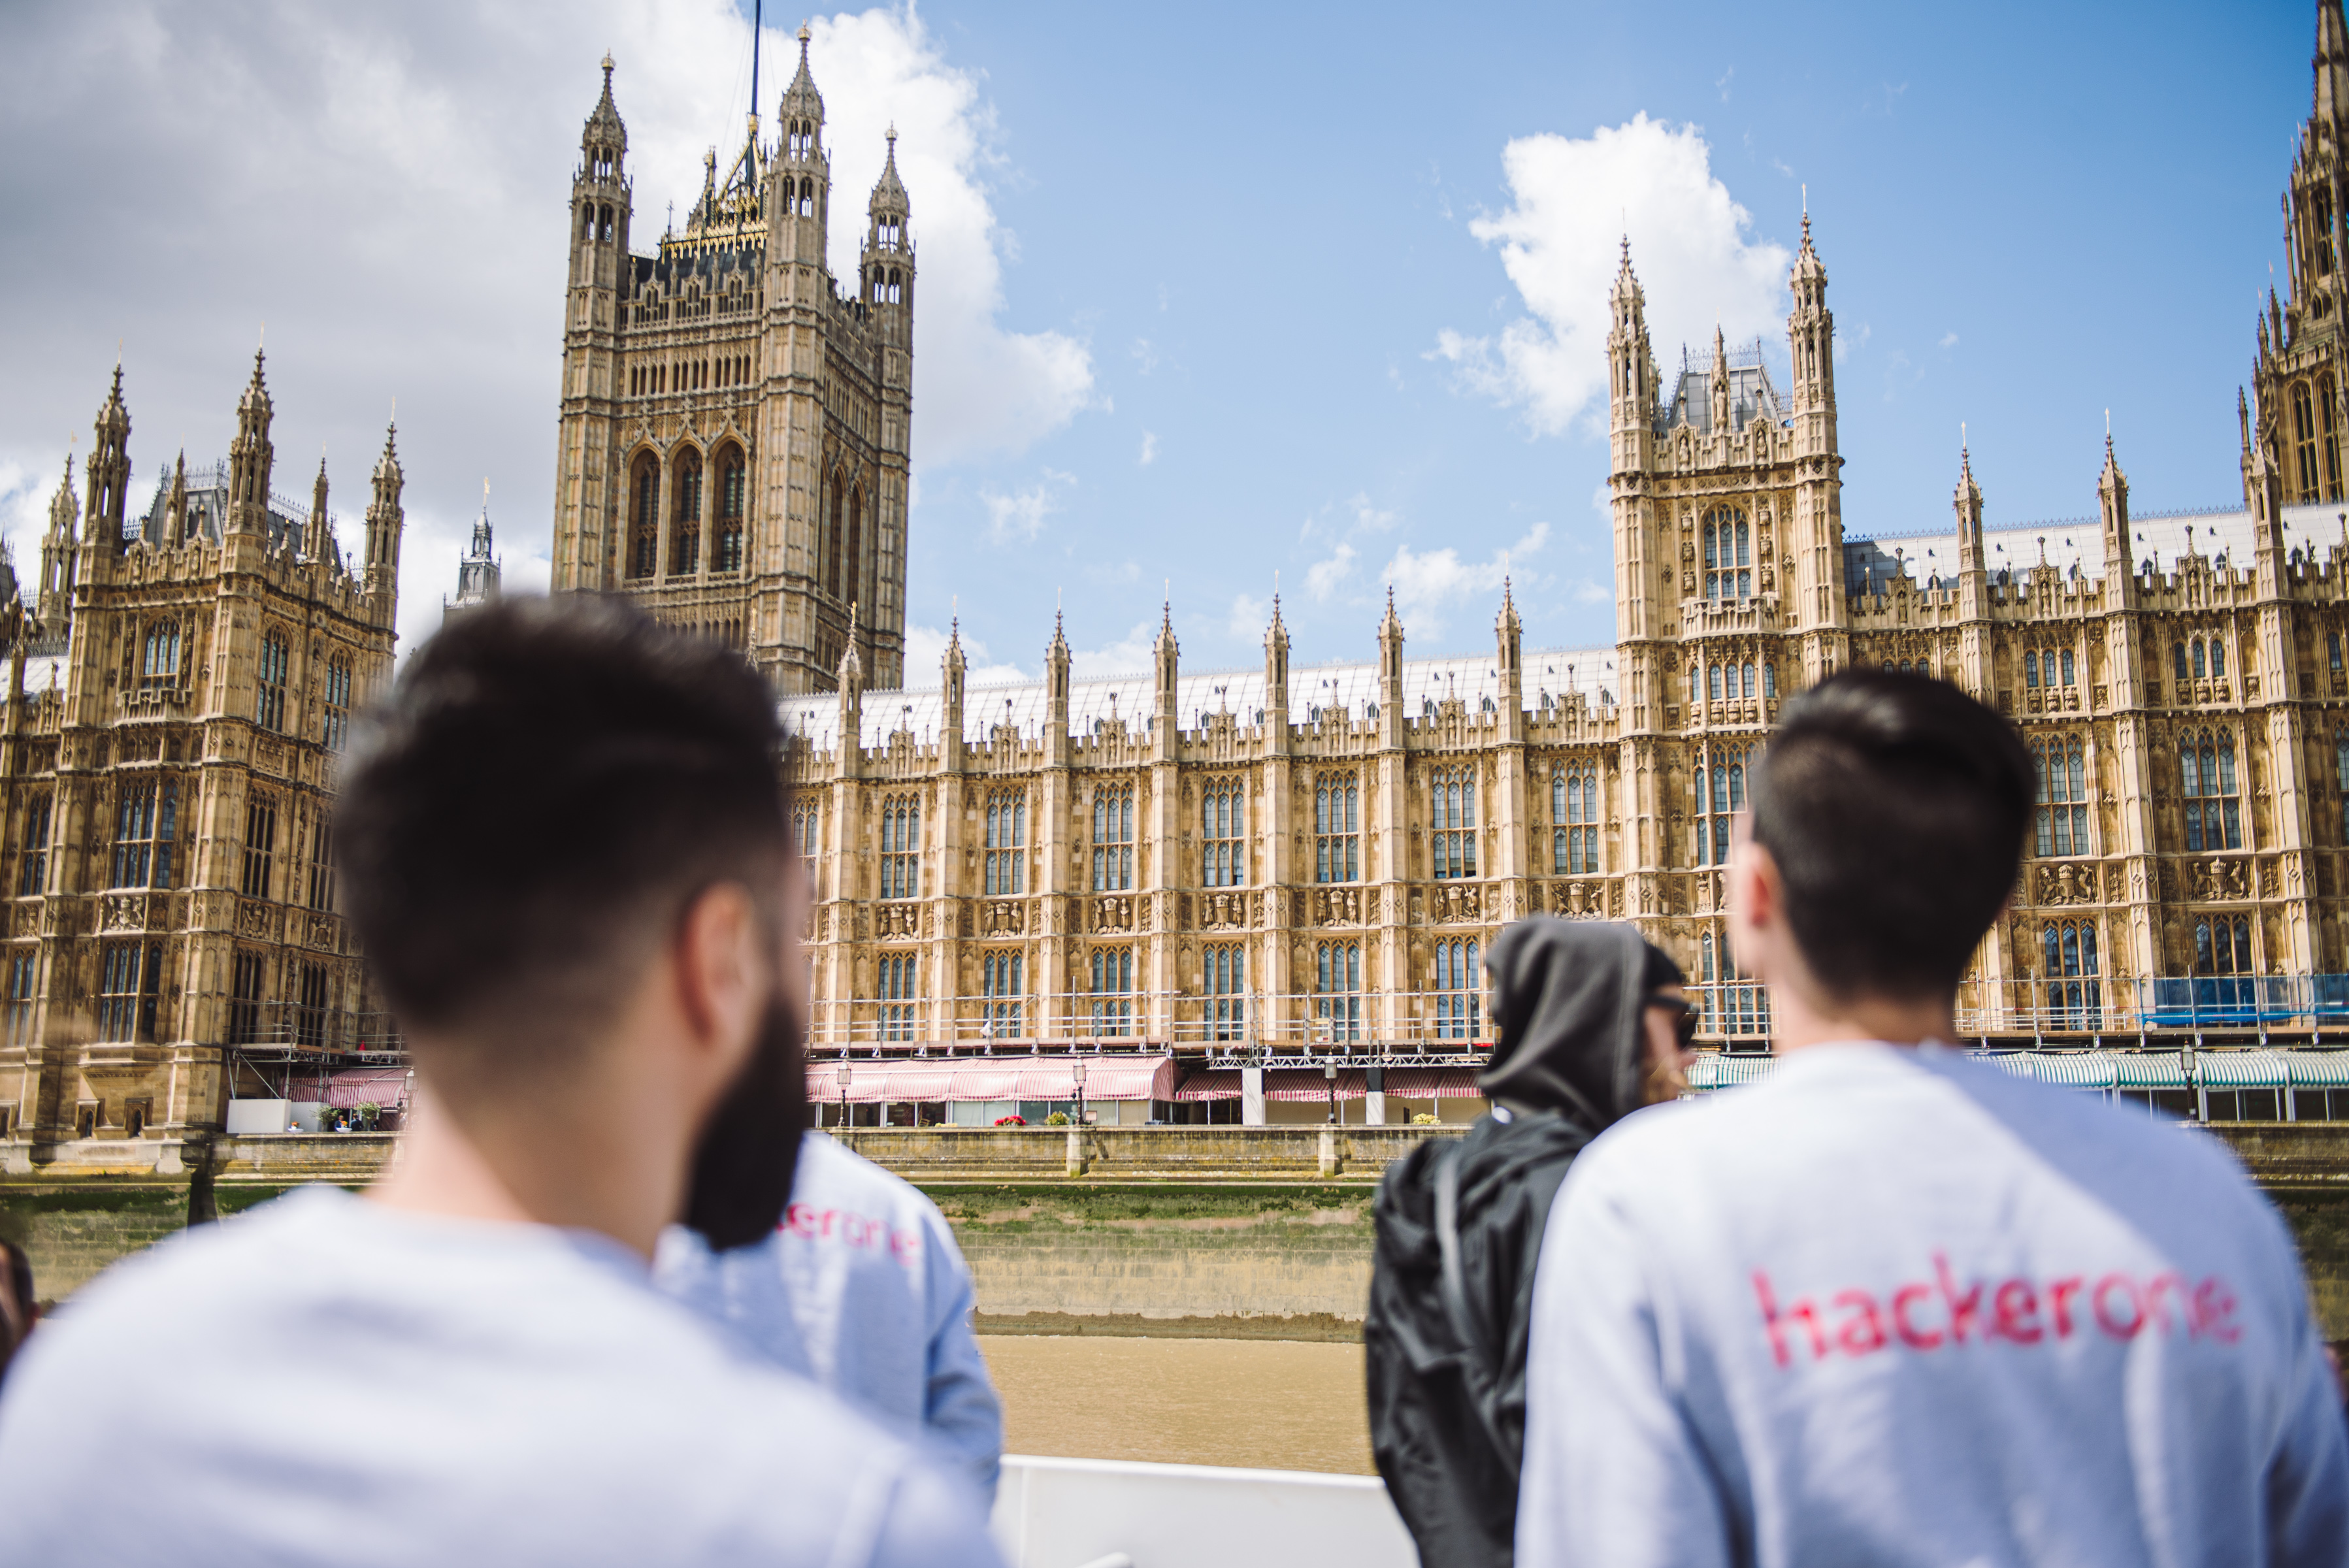 Hackers check out iconic London architecture 